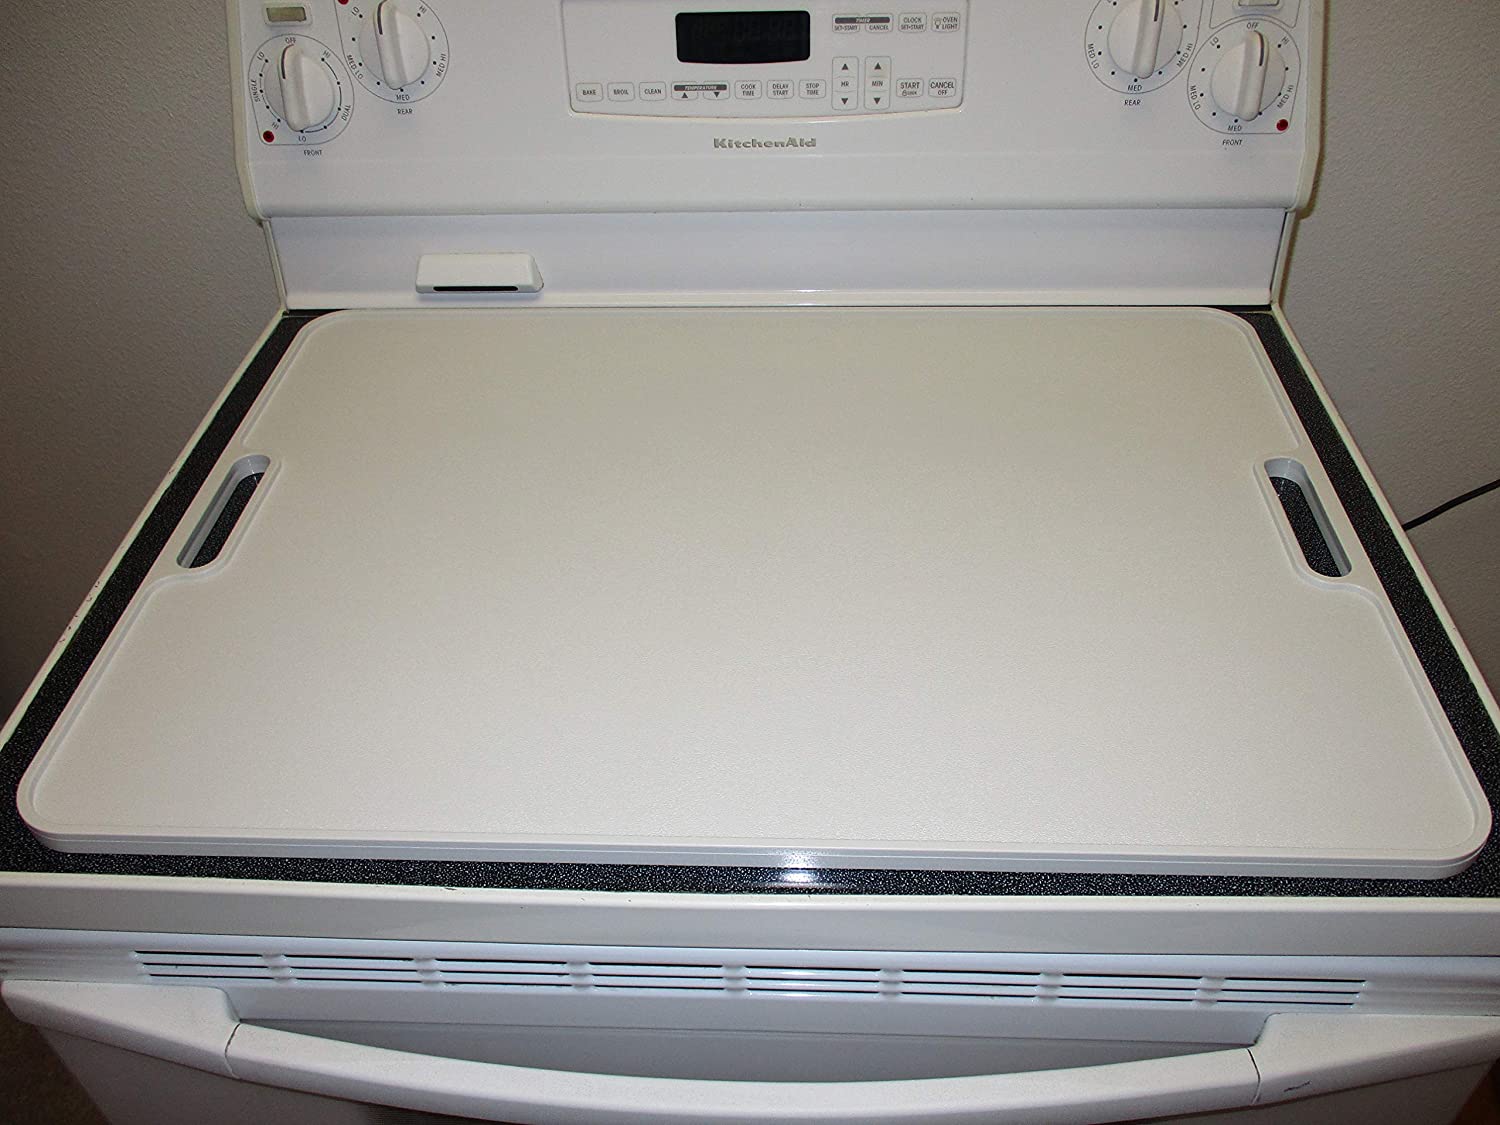 Stove Top Cover, Extra Work Space Large Load Bearing Capacity